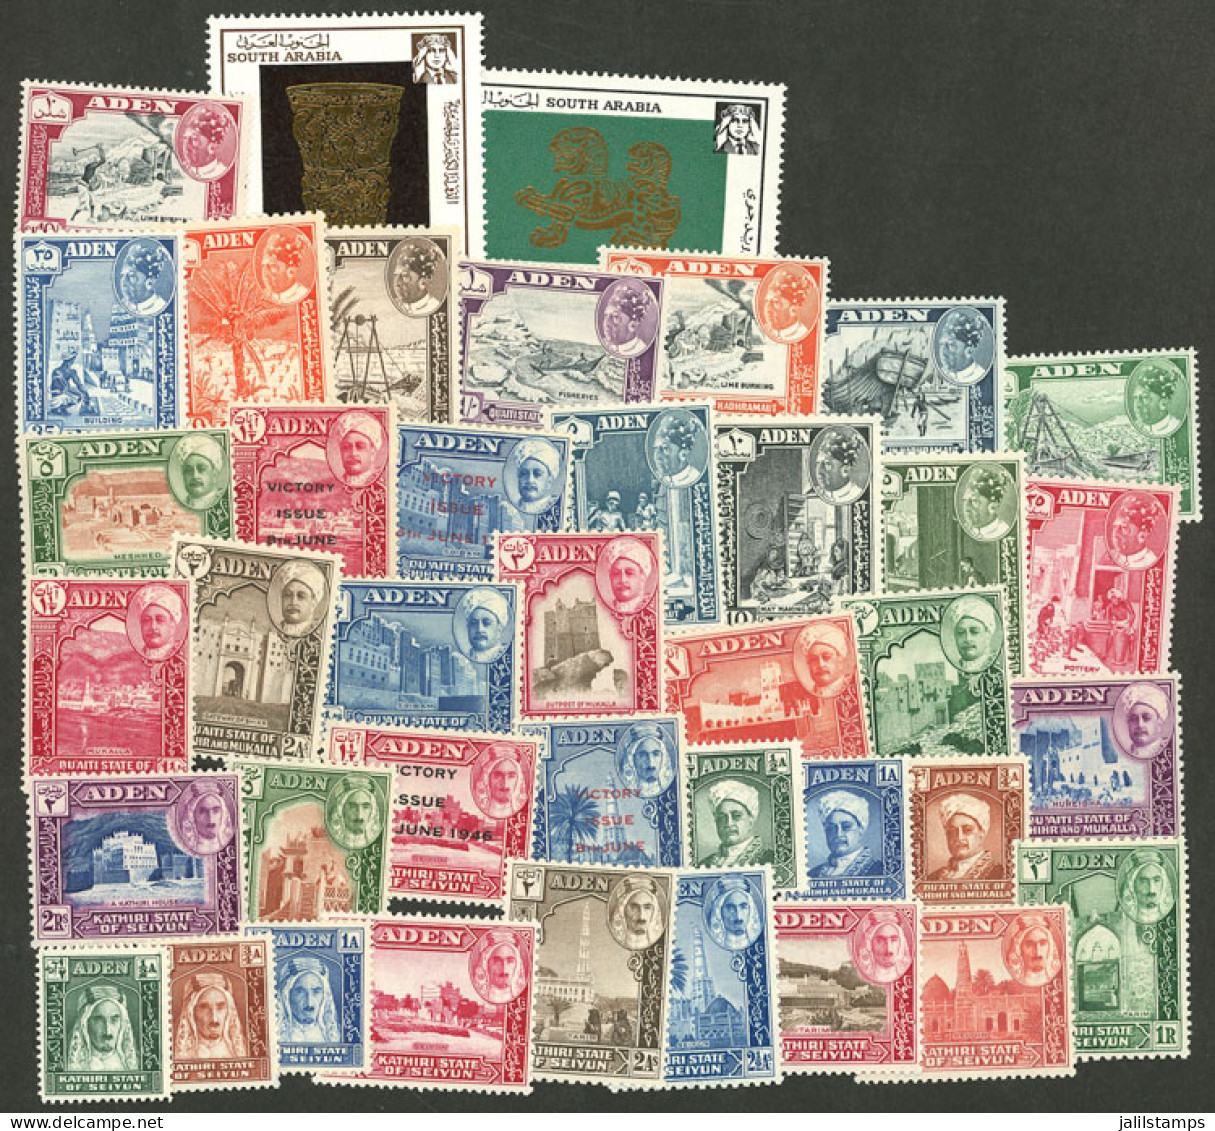 ADEN: Lot Of Complete Sets, MNH (one With Light Hinge Marks), Very Fine Quality! - Aden (1854-1963)